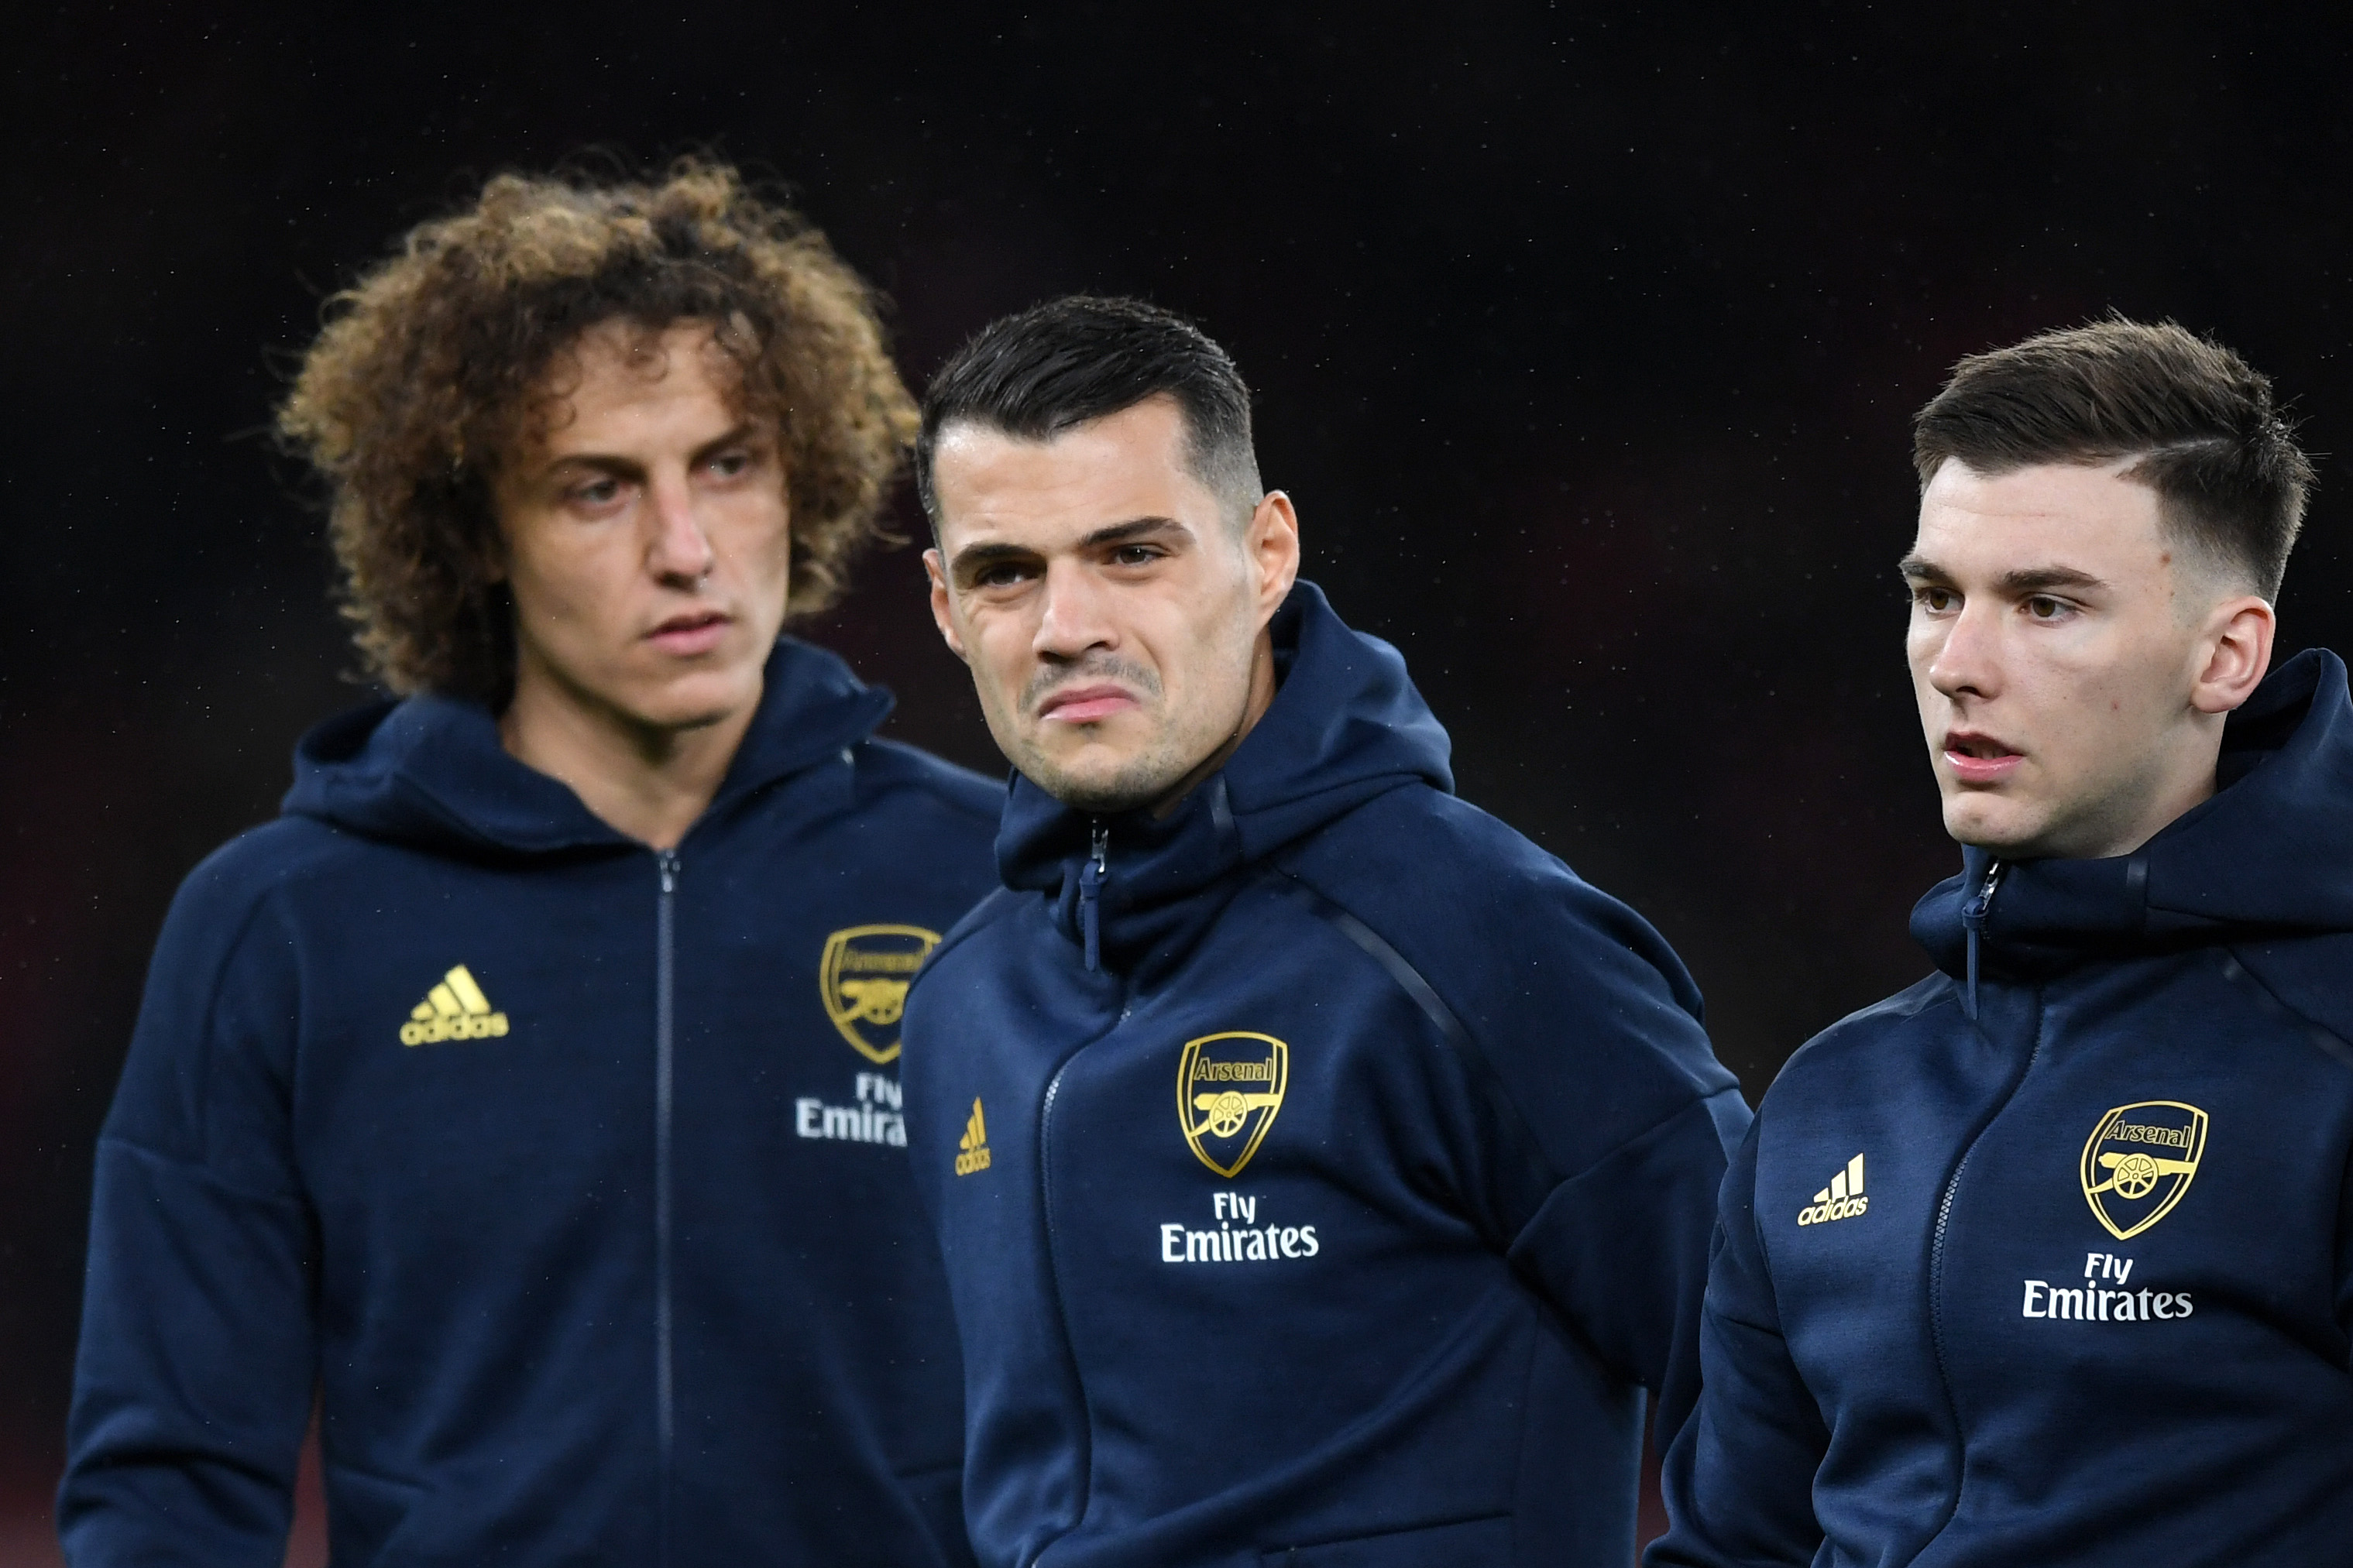 LONDON, ENGLAND - NOVEMBER 28: (L-R) David Luiz, Granit Xhaka and Kieran Tierney of Arsenal look on they line up ahead of the UEFA Europa League group F match between Arsenal FC and Eintracht Frankfurt at Emirates Stadium on November 28, 2019 in London, United Kingdom. (Photo by Shaun Botterill/Getty Images)